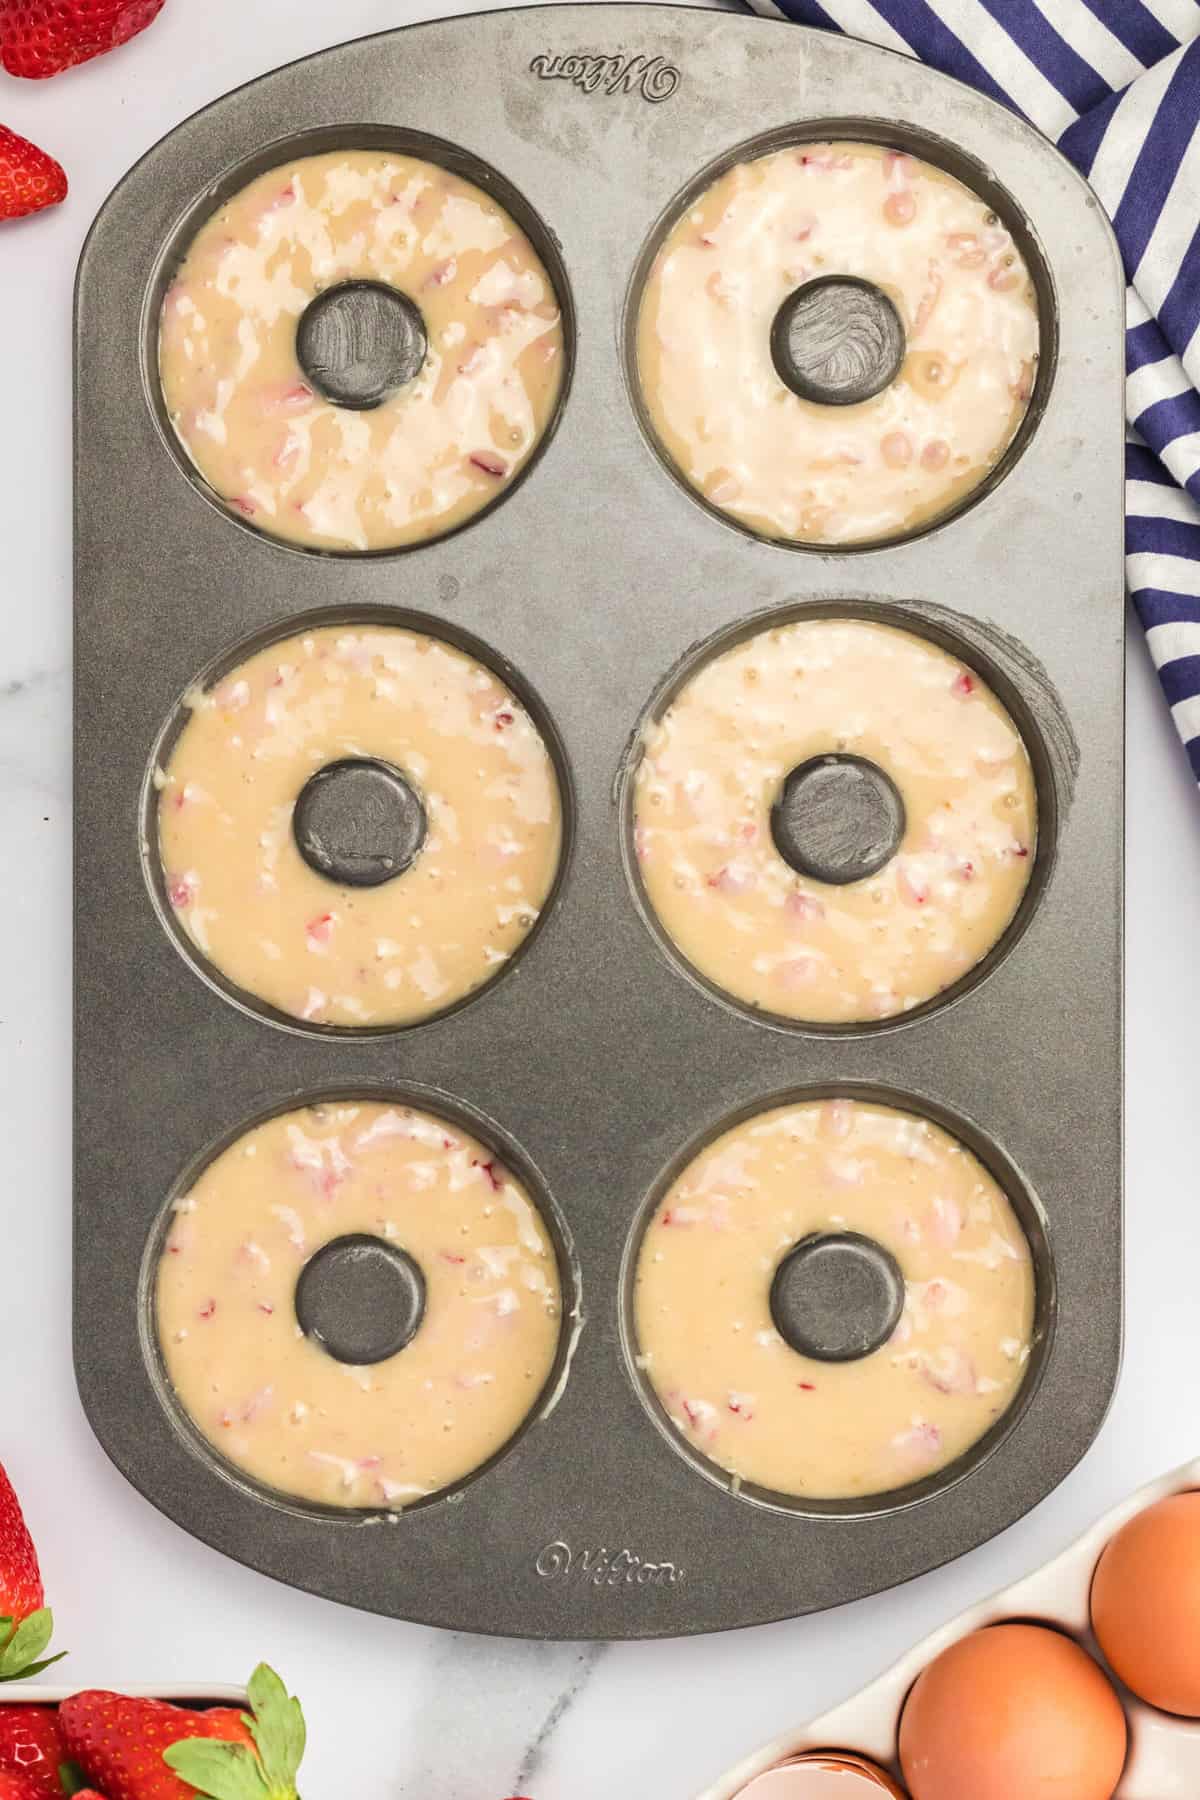 Top view of donut baking pan with strawberry donut batter filling the donut rings. 